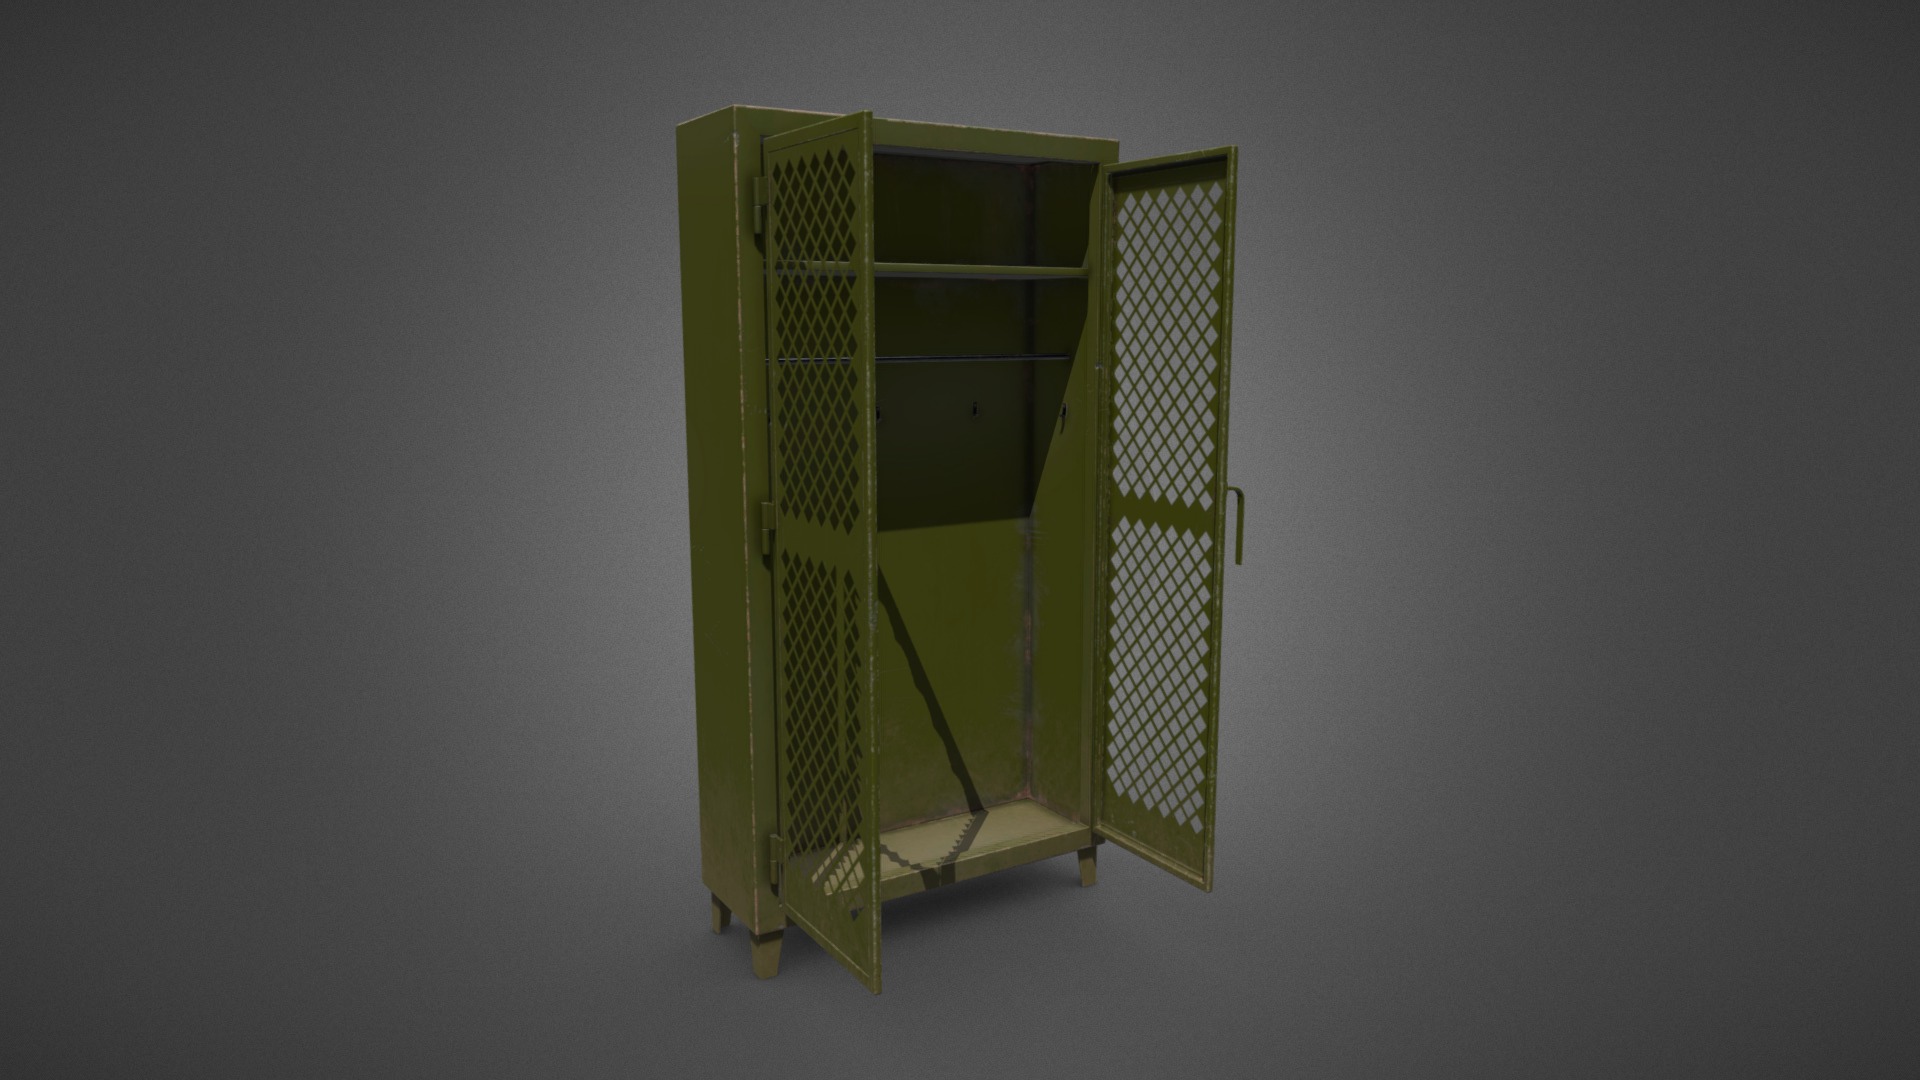 3D model Equipment Locker - This is a 3D model of the Equipment Locker. The 3D model is about a green rectangular object with a yellow frame.